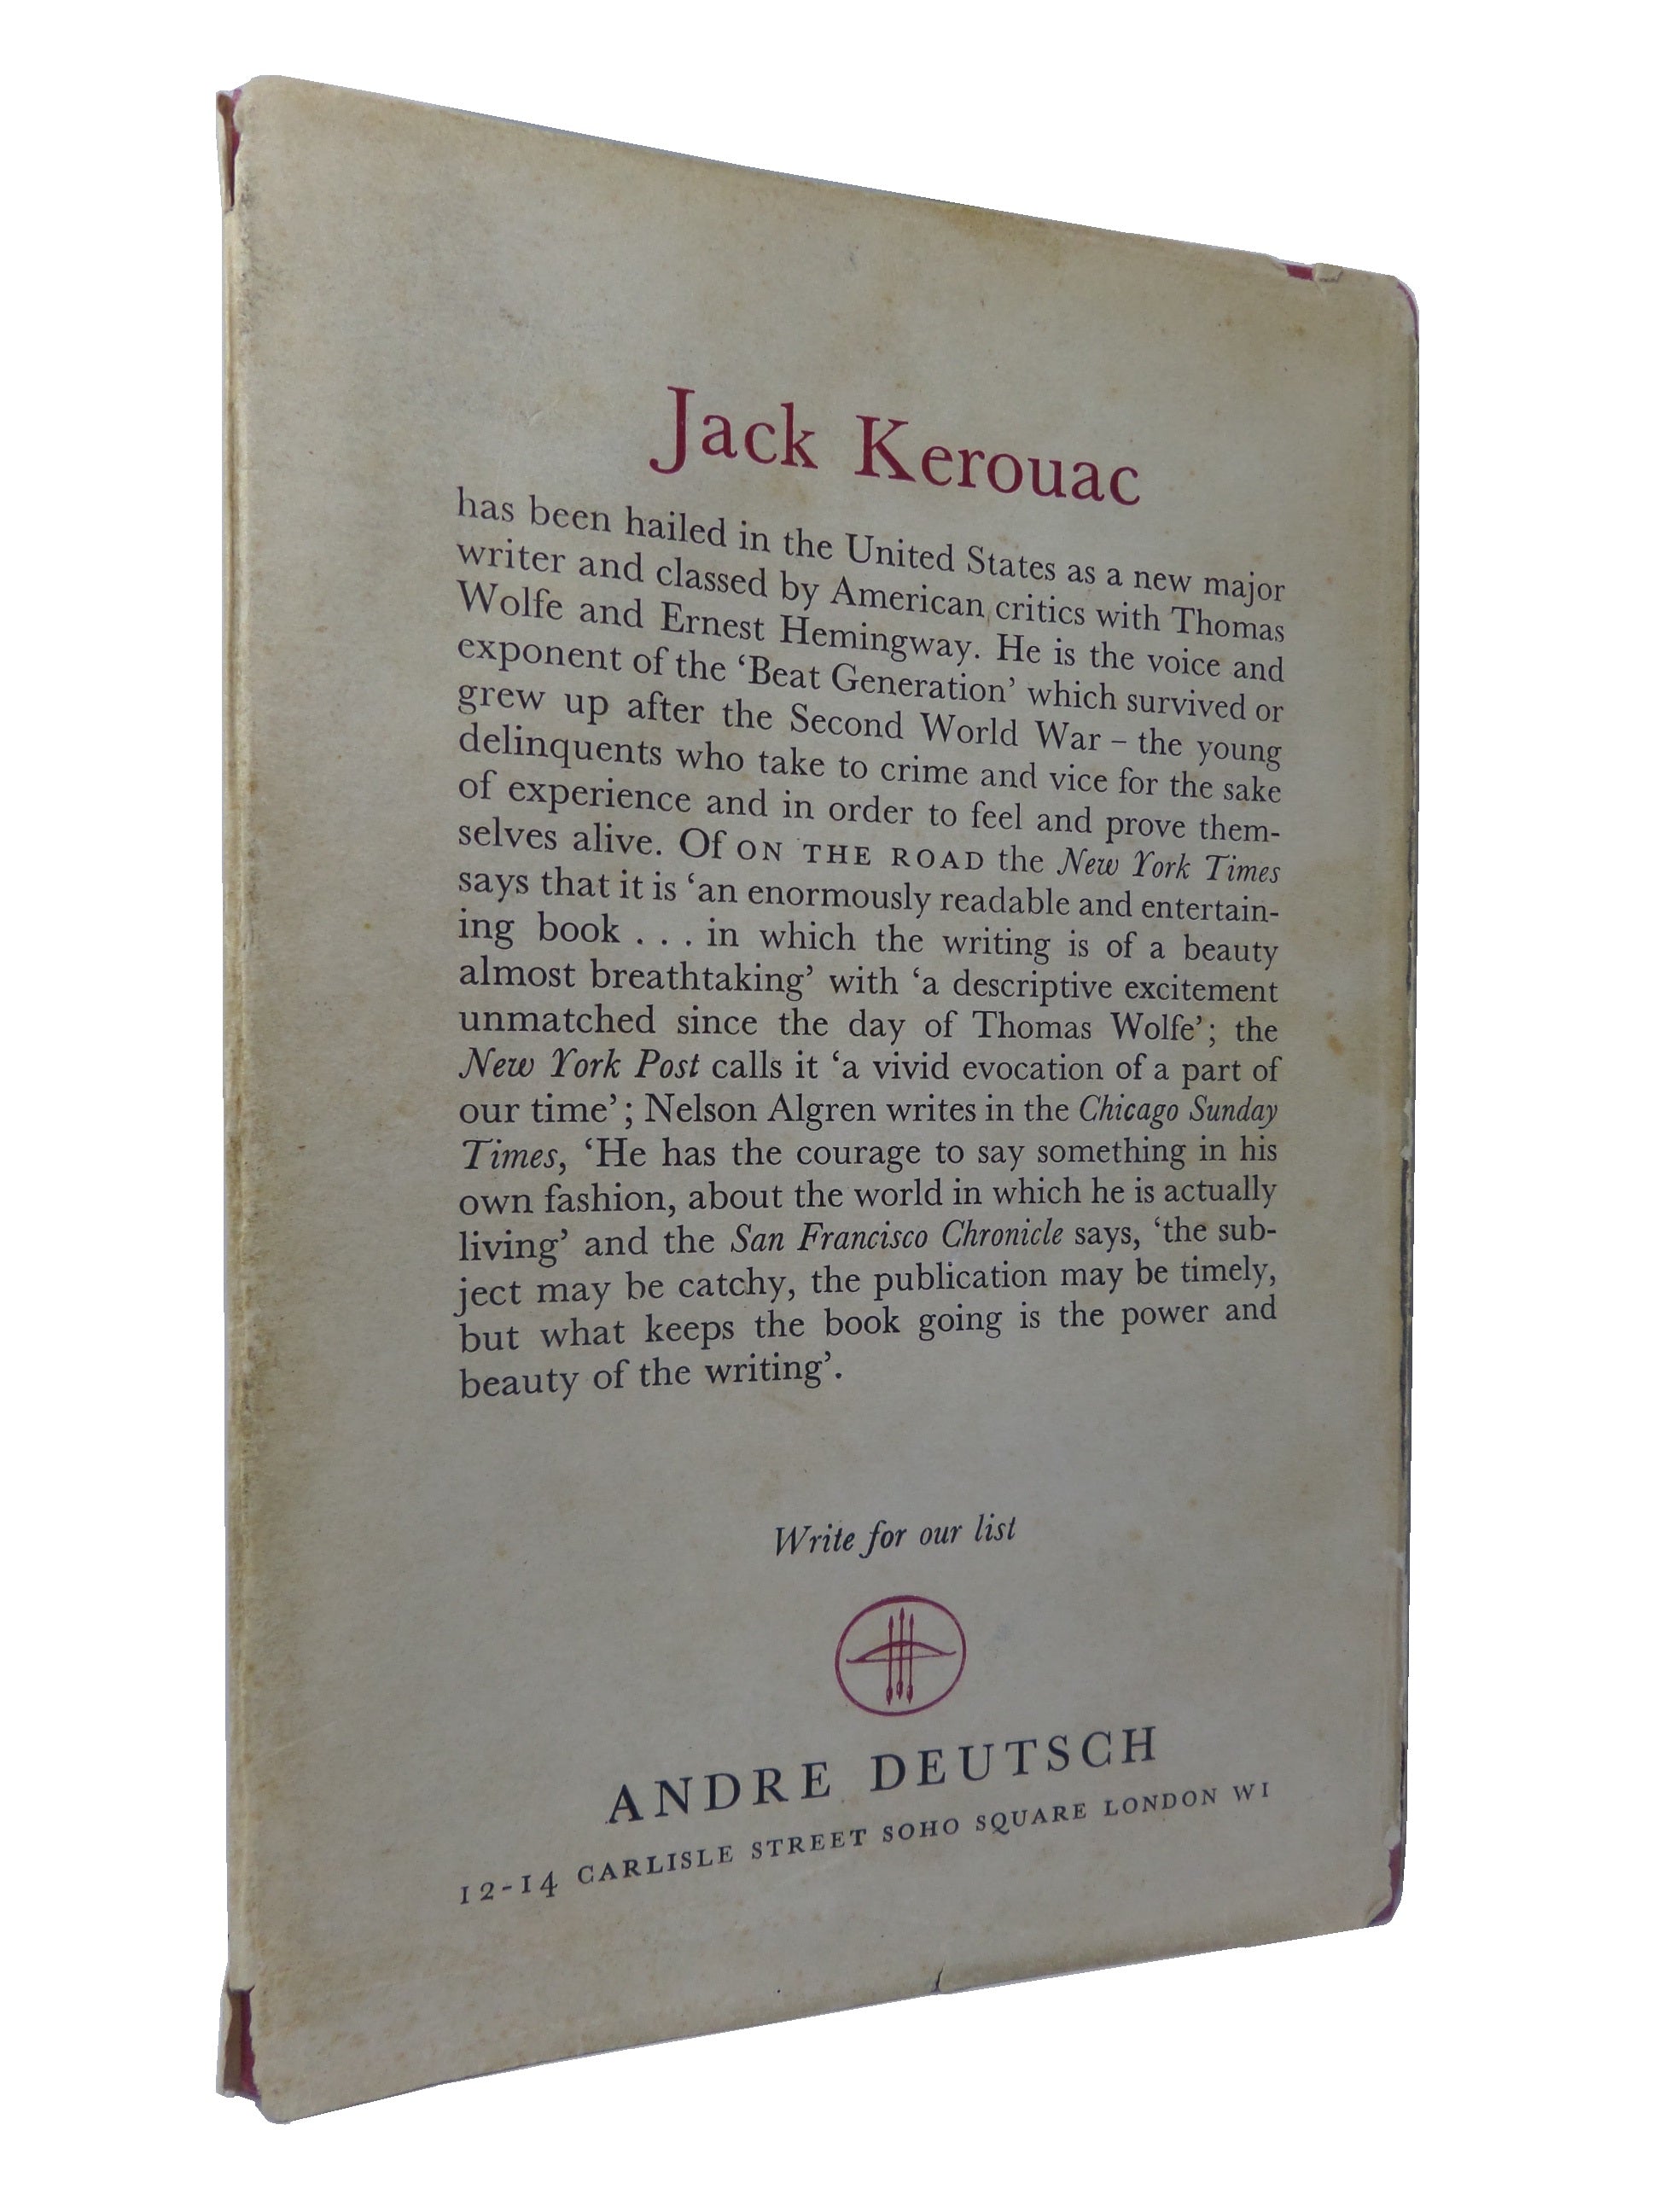 ON THE ROAD BY JACK KEROUAC 1958 FIRST EDITION WITH DUST JACKET